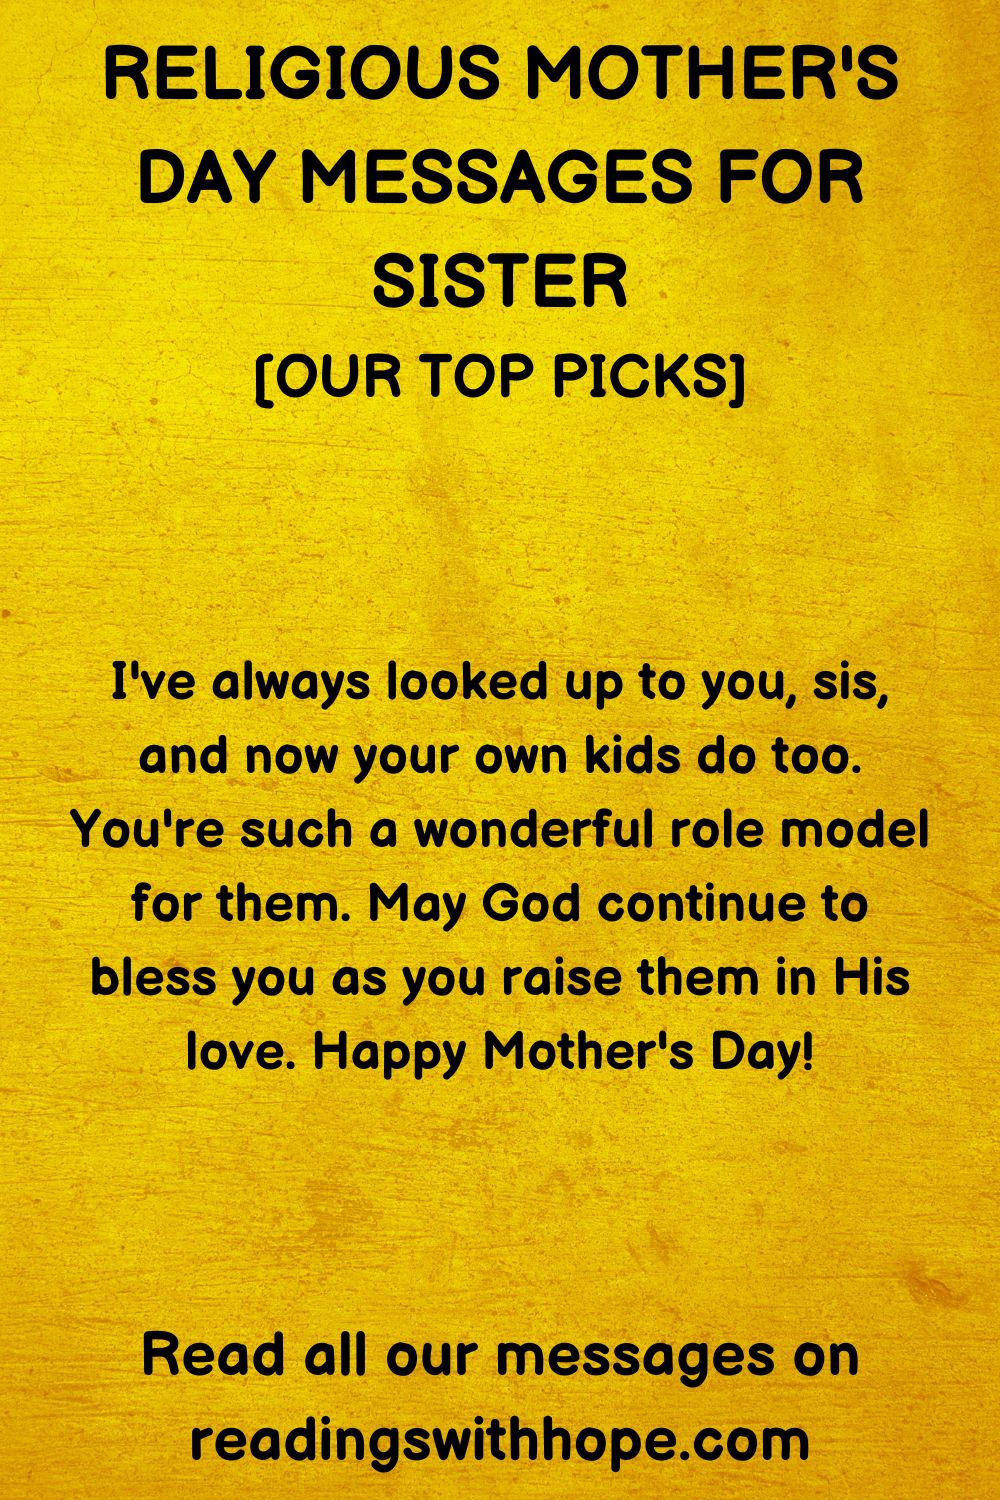 Religious Mother's Day Messages For Sister
